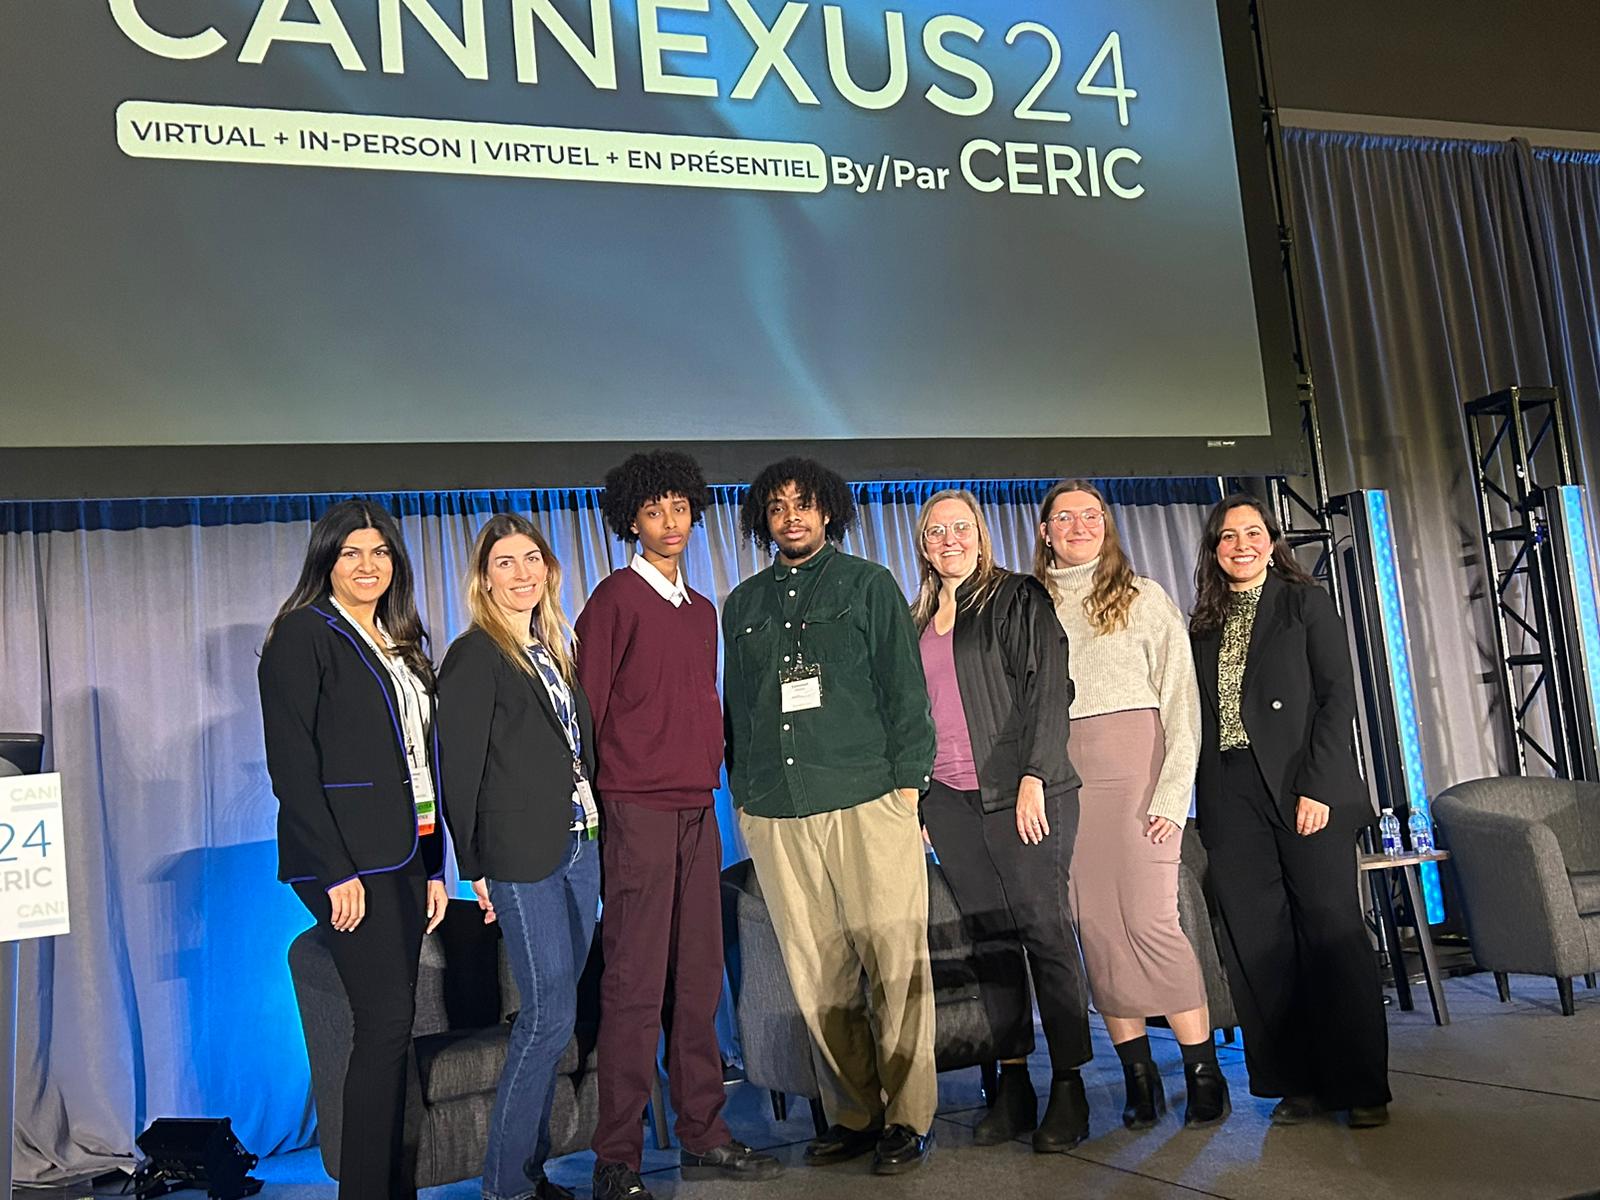 Cannexus conference